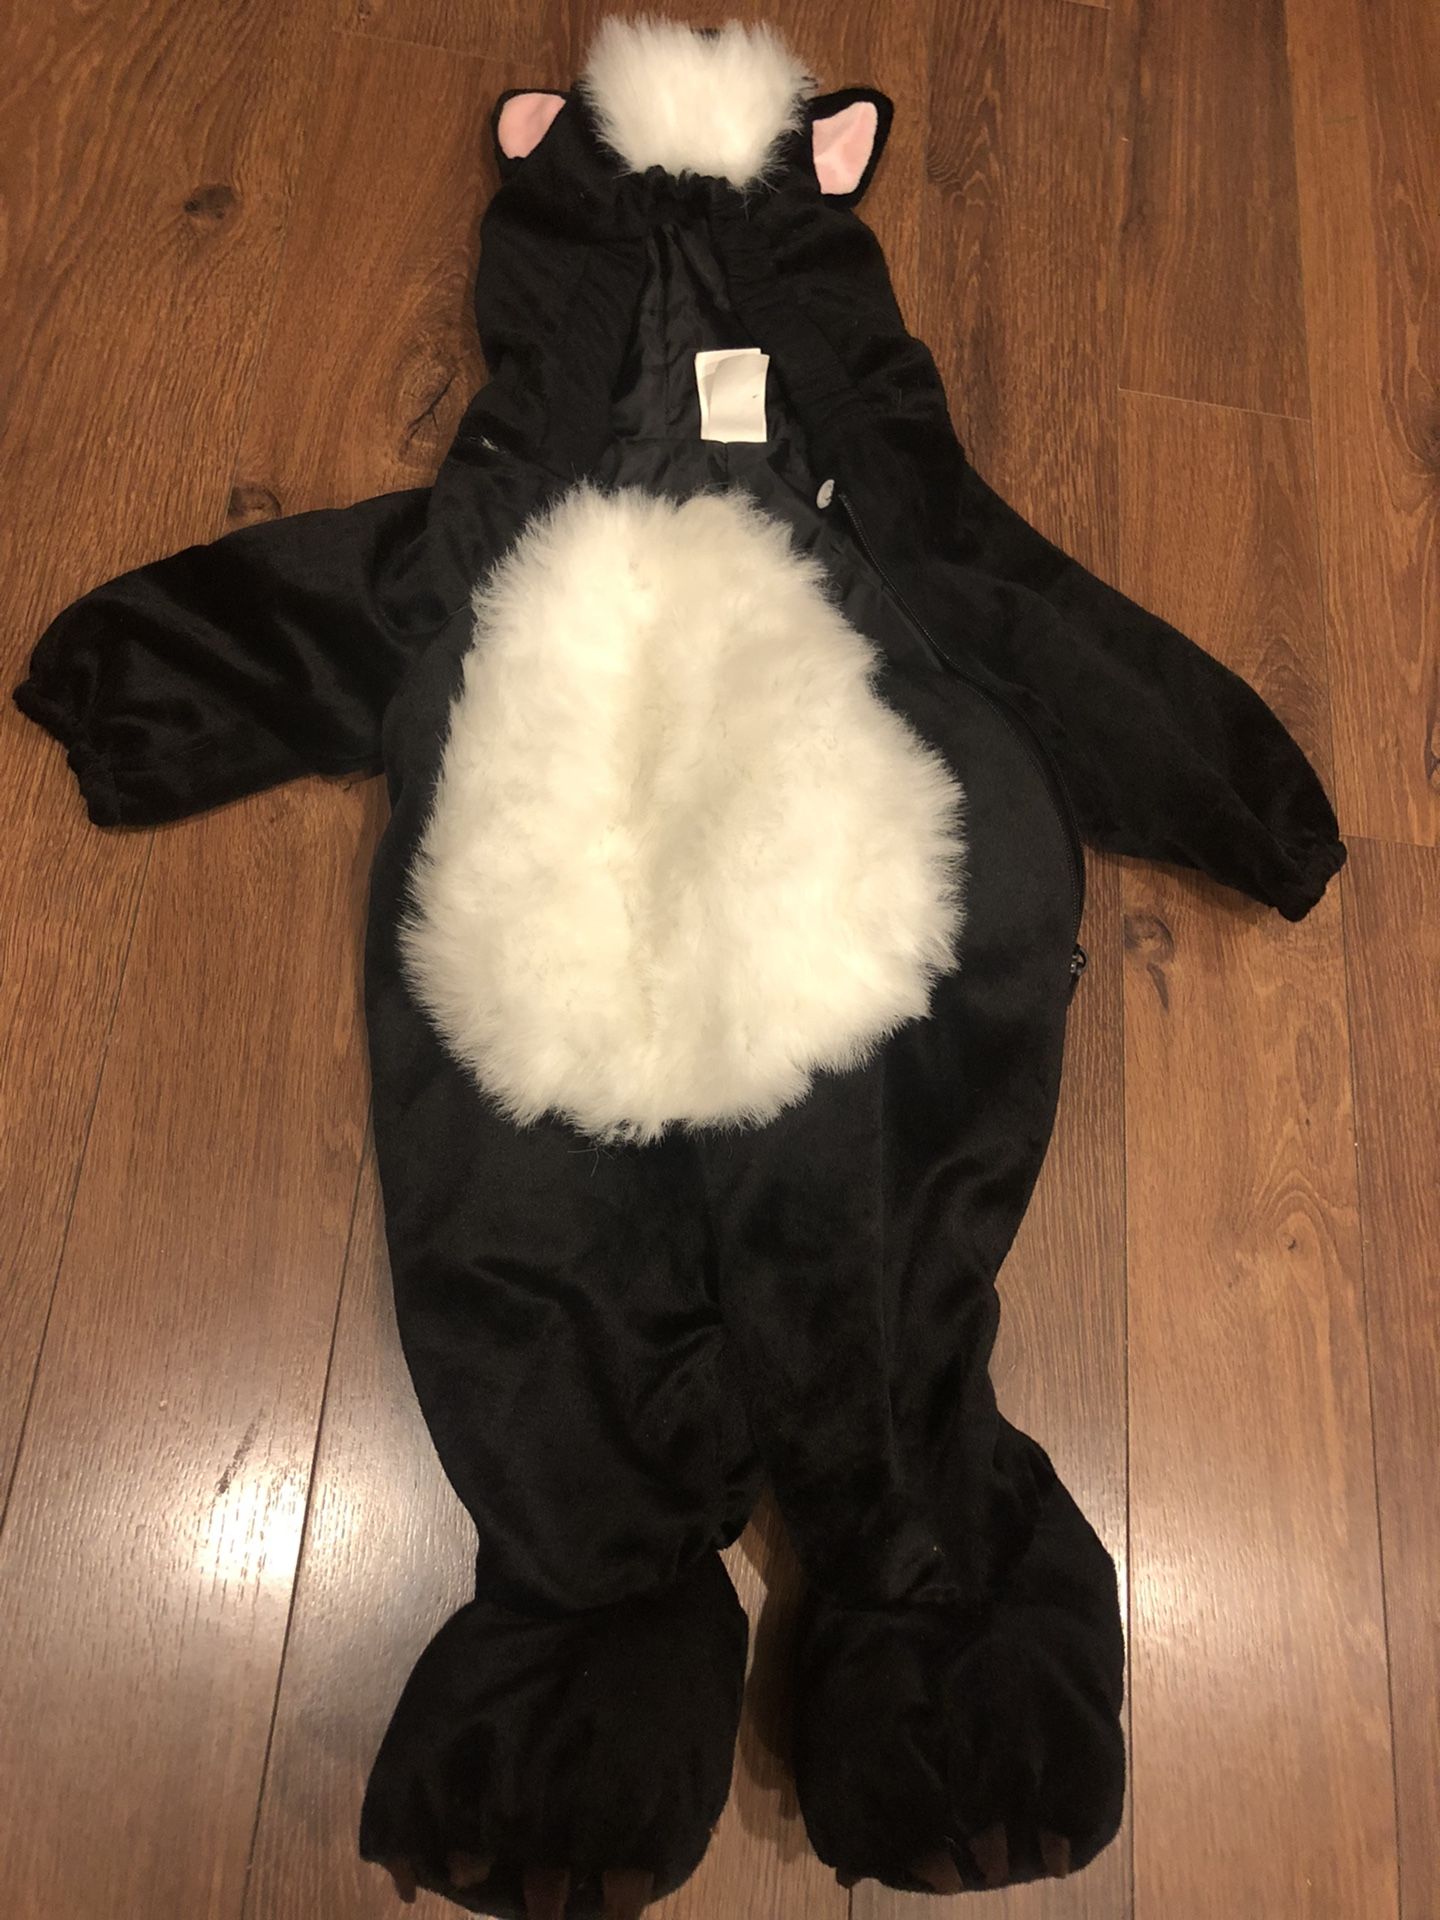 New Little stinker Skunk Costume - Baby Size 6-12 Months 